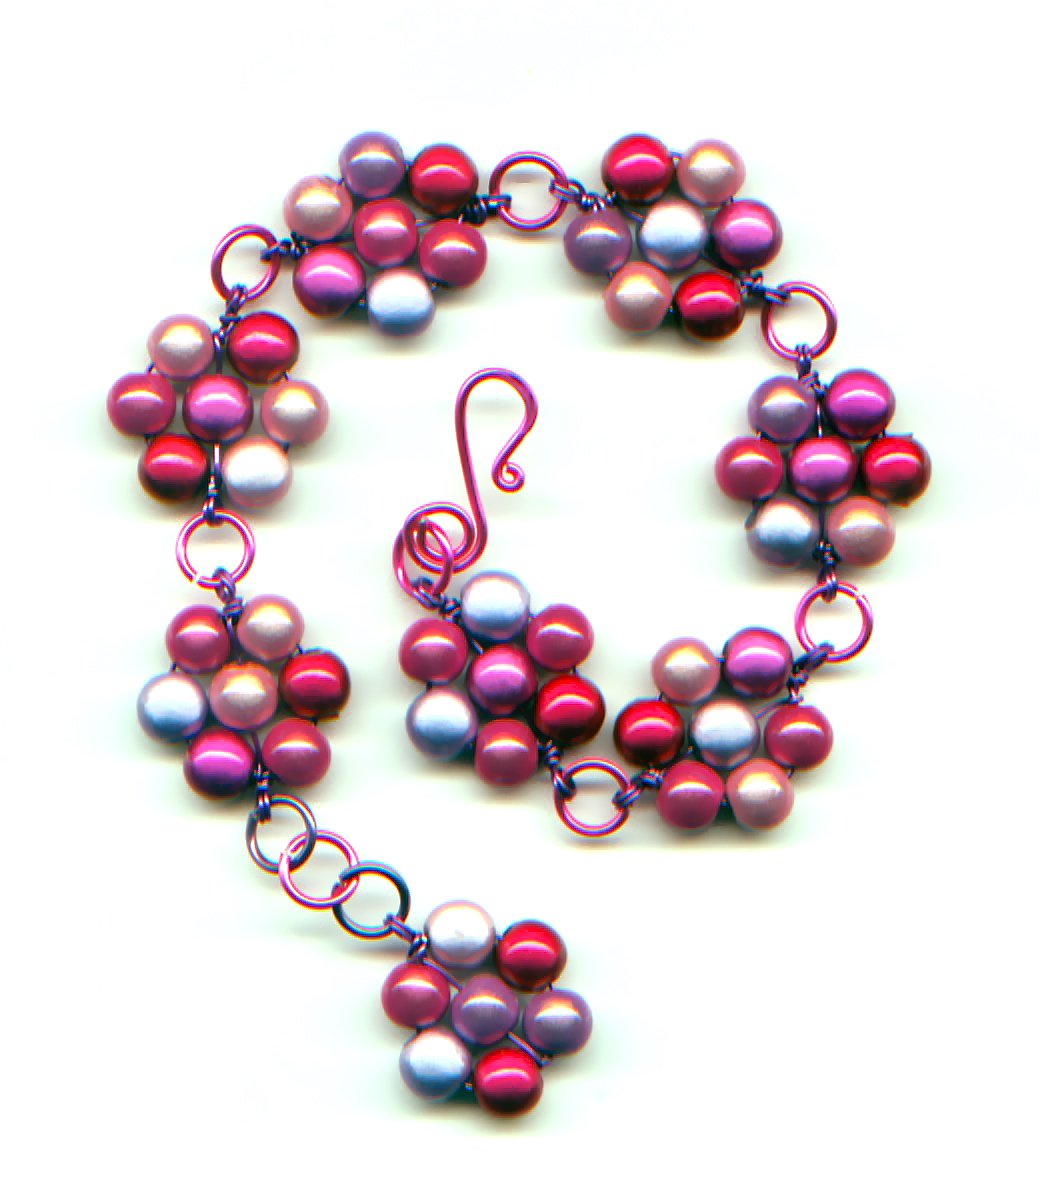 Wire Wrapped Daisy Chain Jewelry Tutorial - The Beading ...